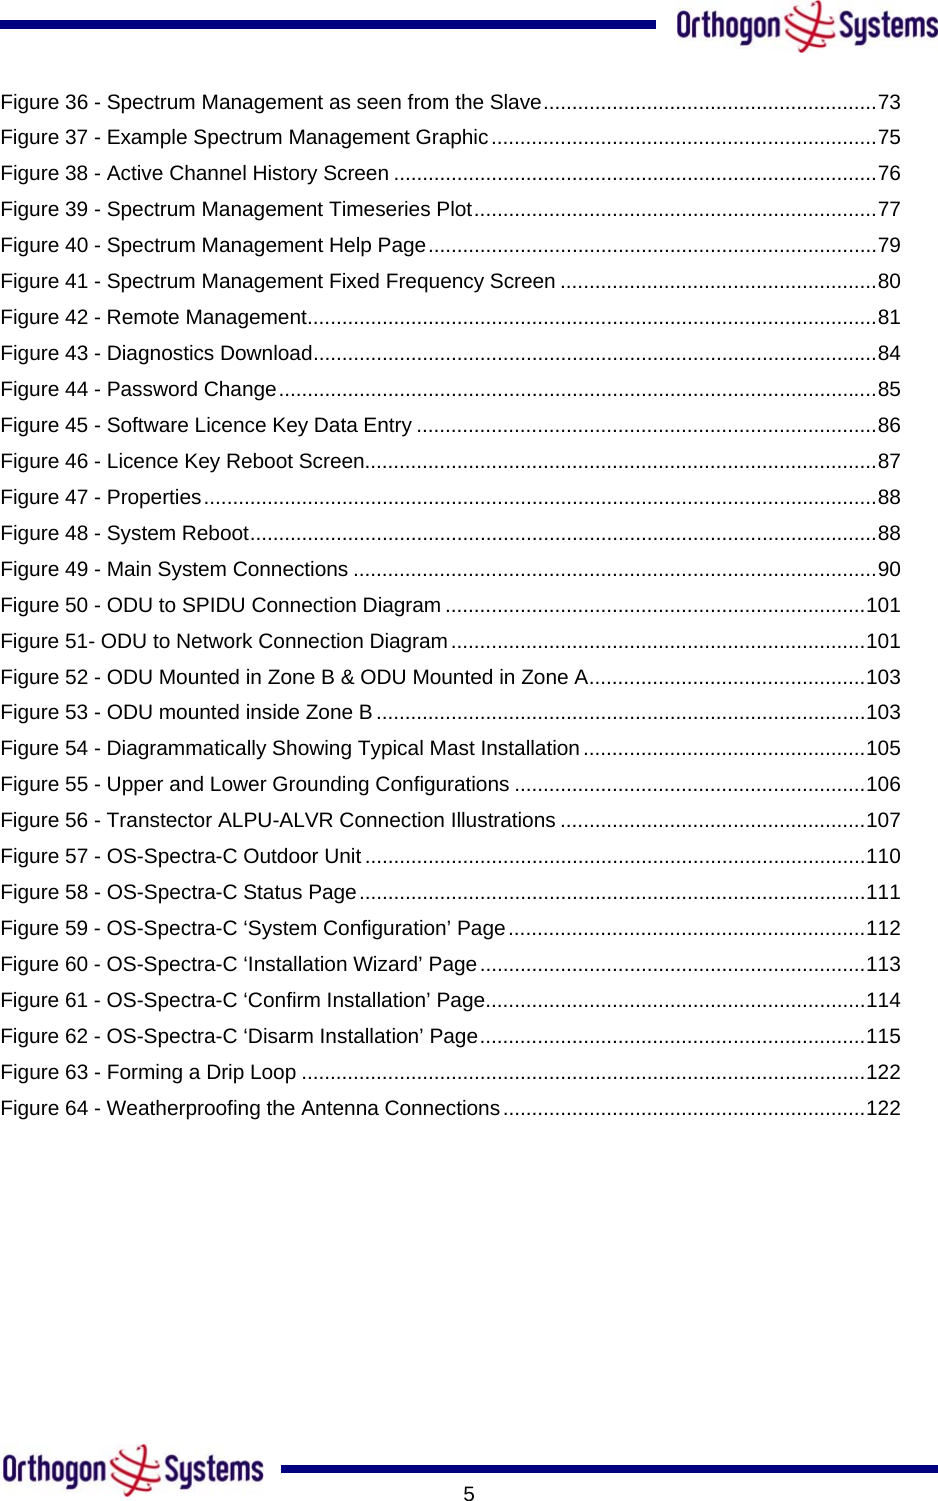       5Figure 36 - Spectrum Management as seen from the Slave..........................................................73 Figure 37 - Example Spectrum Management Graphic...................................................................75 Figure 38 - Active Channel History Screen ....................................................................................76 Figure 39 - Spectrum Management Timeseries Plot......................................................................77 Figure 40 - Spectrum Management Help Page..............................................................................79 Figure 41 - Spectrum Management Fixed Frequency Screen .......................................................80 Figure 42 - Remote Management...................................................................................................81 Figure 43 - Diagnostics Download..................................................................................................84 Figure 44 - Password Change........................................................................................................85 Figure 45 - Software Licence Key Data Entry ................................................................................86 Figure 46 - Licence Key Reboot Screen.........................................................................................87 Figure 47 - Properties.....................................................................................................................88 Figure 48 - System Reboot.............................................................................................................88 Figure 49 - Main System Connections ...........................................................................................90 Figure 50 - ODU to SPIDU Connection Diagram .........................................................................101 Figure 51- ODU to Network Connection Diagram........................................................................101 Figure 52 - ODU Mounted in Zone B &amp; ODU Mounted in Zone A................................................103 Figure 53 - ODU mounted inside Zone B .....................................................................................103 Figure 54 - Diagrammatically Showing Typical Mast Installation .................................................105 Figure 55 - Upper and Lower Grounding Configurations .............................................................106 Figure 56 - Transtector ALPU-ALVR Connection Illustrations .....................................................107 Figure 57 - OS-Spectra-C Outdoor Unit.......................................................................................110 Figure 58 - OS-Spectra-C Status Page........................................................................................111 Figure 59 - OS-Spectra-C ‘System Configuration’ Page..............................................................112 Figure 60 - OS-Spectra-C ‘Installation Wizard’ Page...................................................................113 Figure 61 - OS-Spectra-C ‘Confirm Installation’ Page..................................................................114 Figure 62 - OS-Spectra-C ‘Disarm Installation’ Page...................................................................115 Figure 63 - Forming a Drip Loop ..................................................................................................122 Figure 64 - Weatherproofing the Antenna Connections...............................................................122  